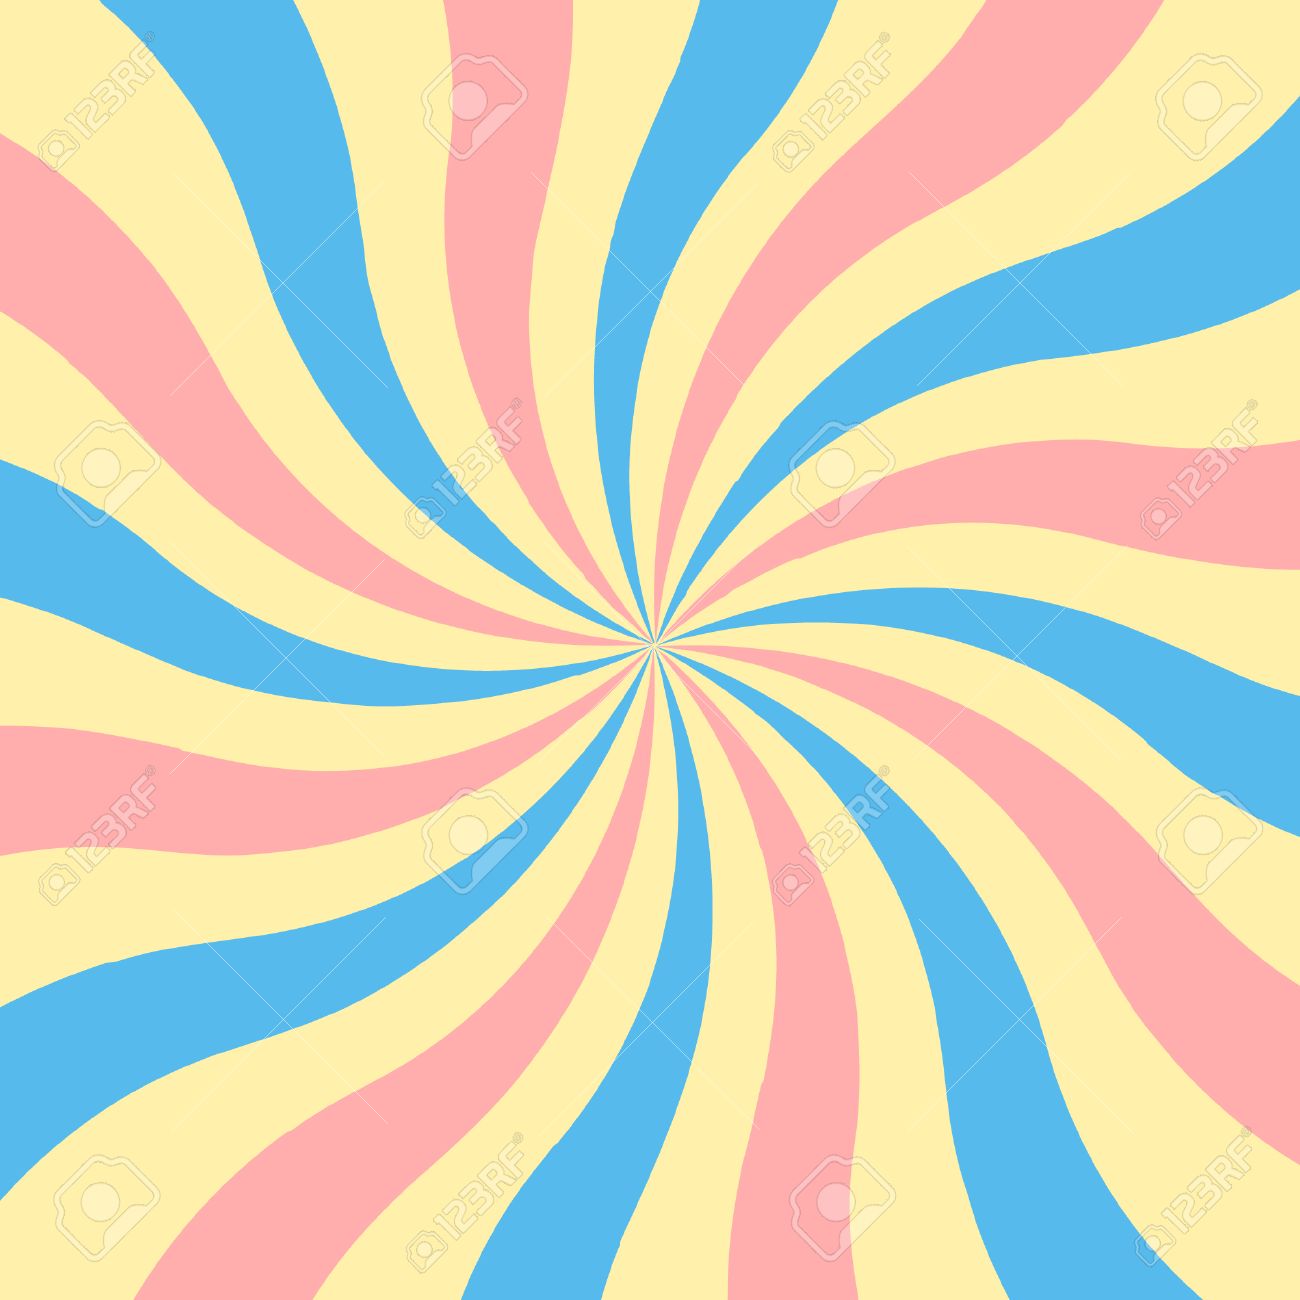 Sunburst Retro Background Inspired By 60s Candy Colors Royalty